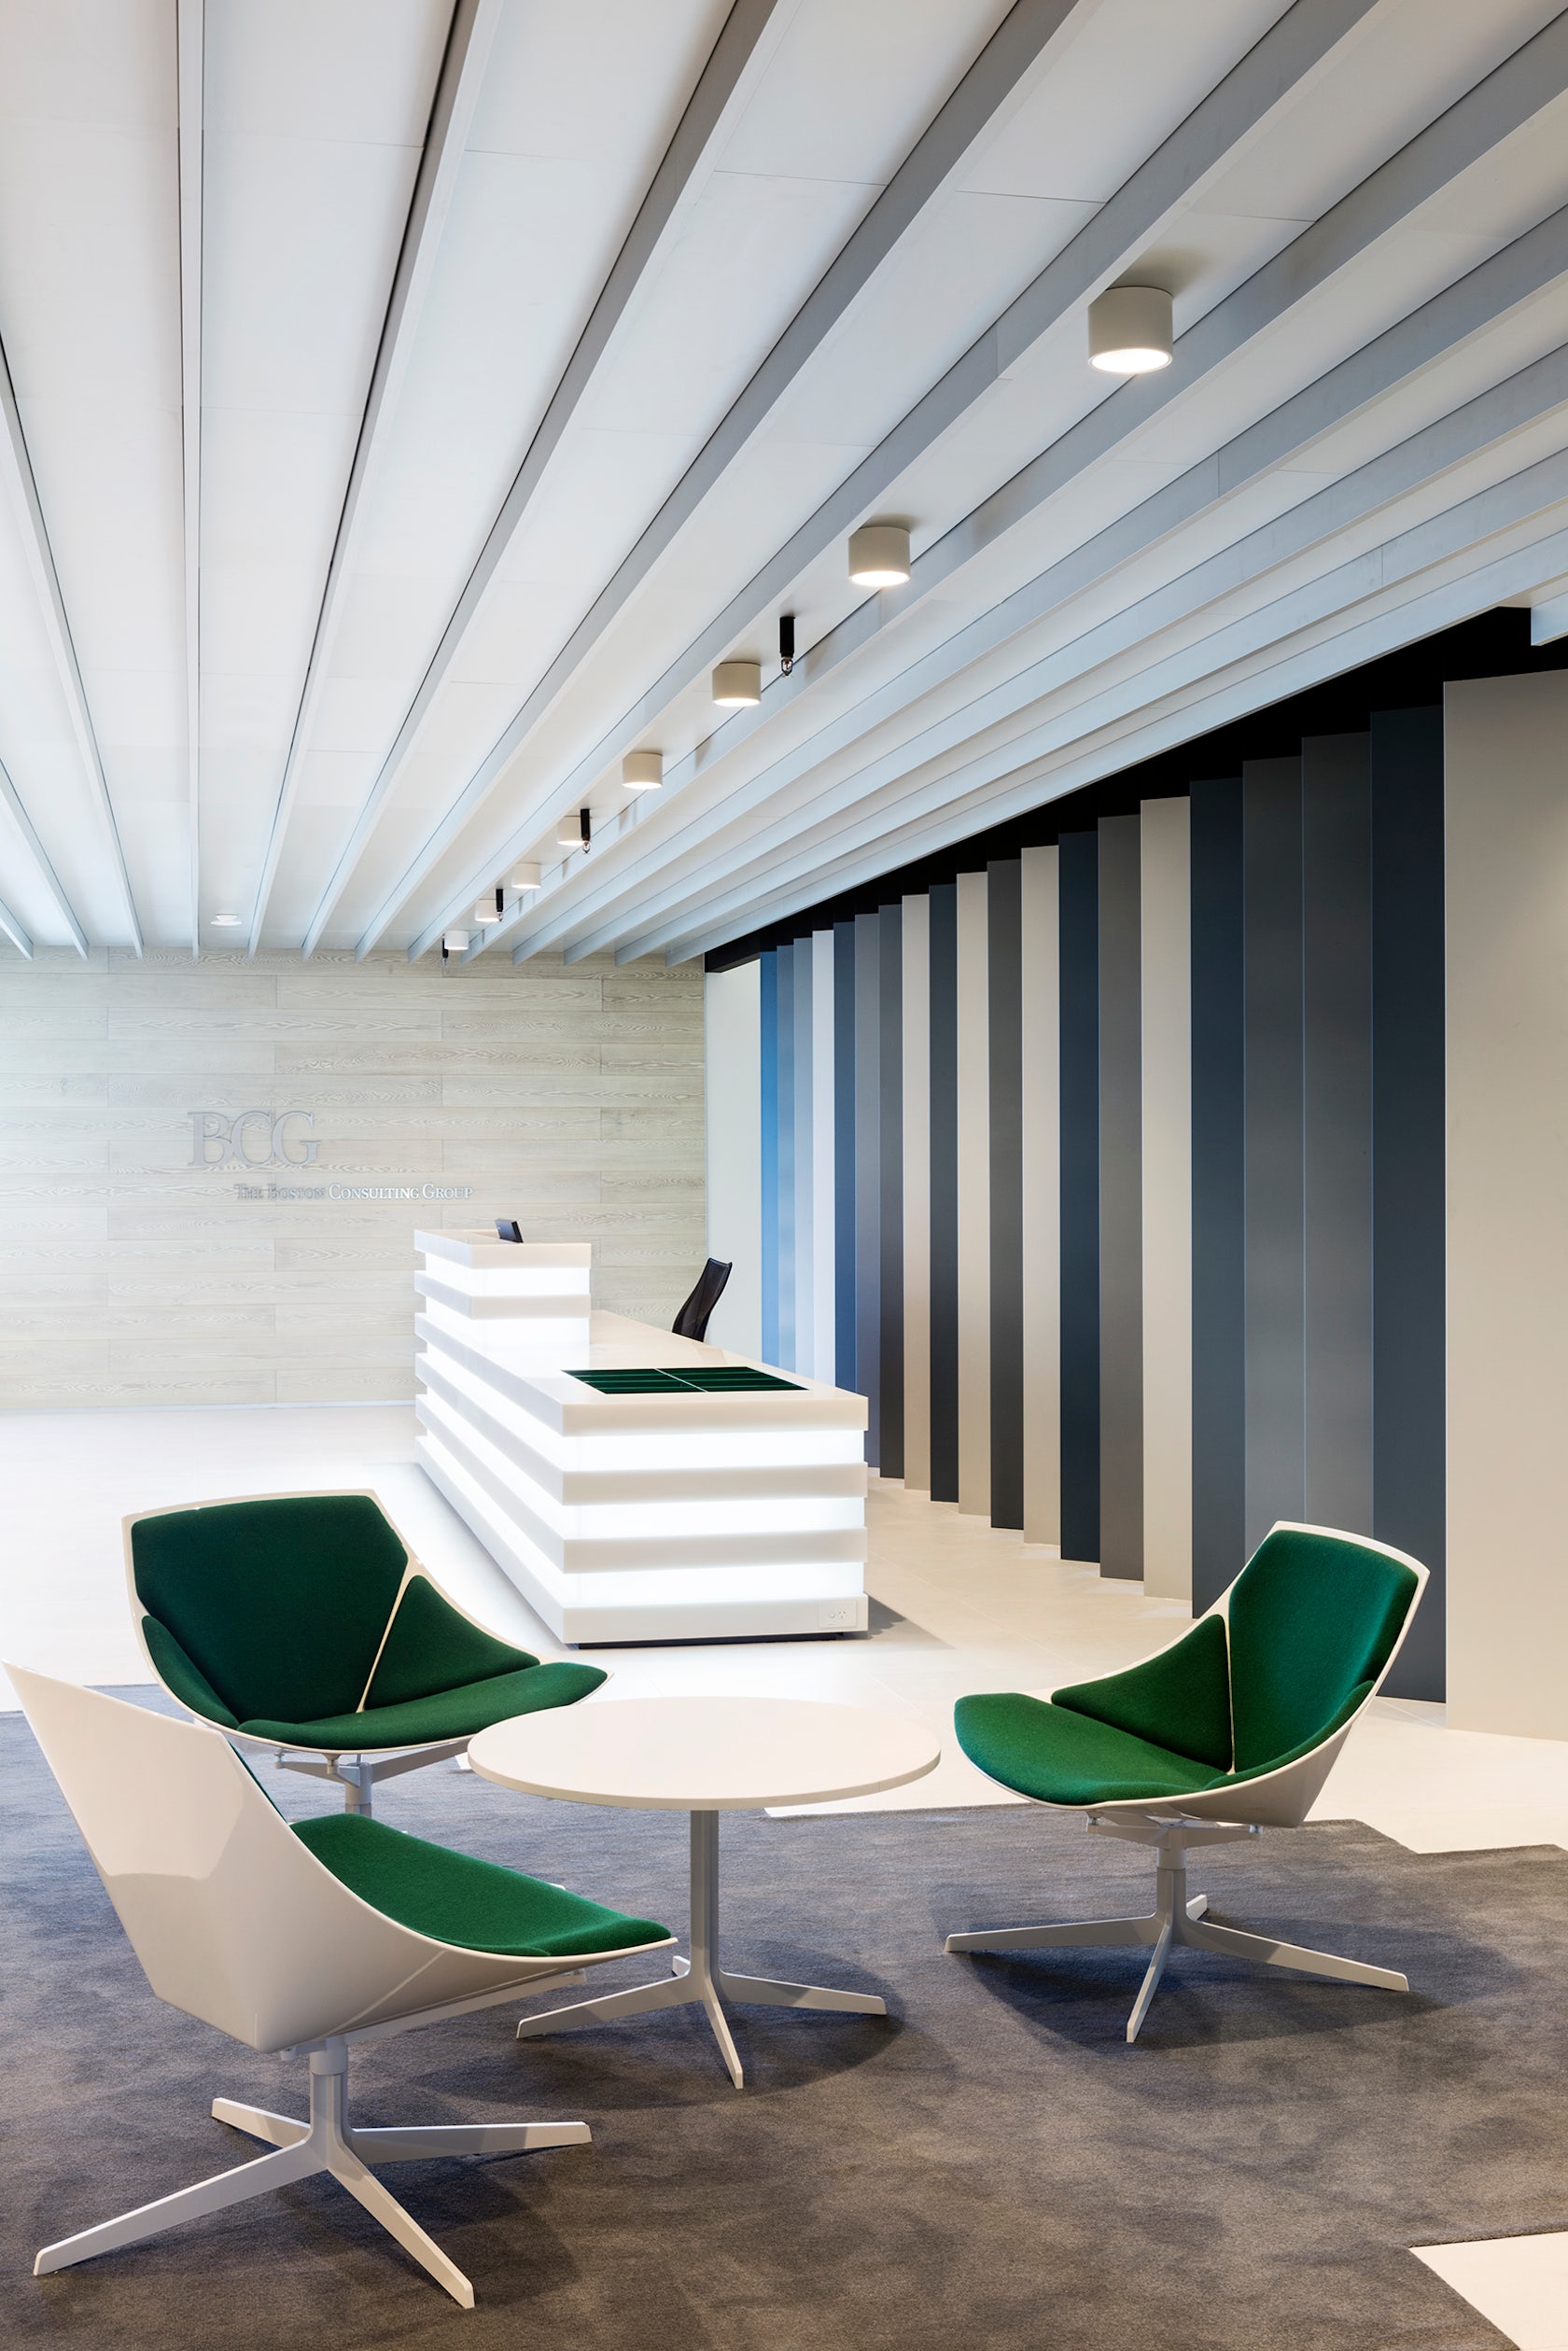 The Boston Consulting Group Perth - Architizer - 1680 x 2519 jpeg 453kB